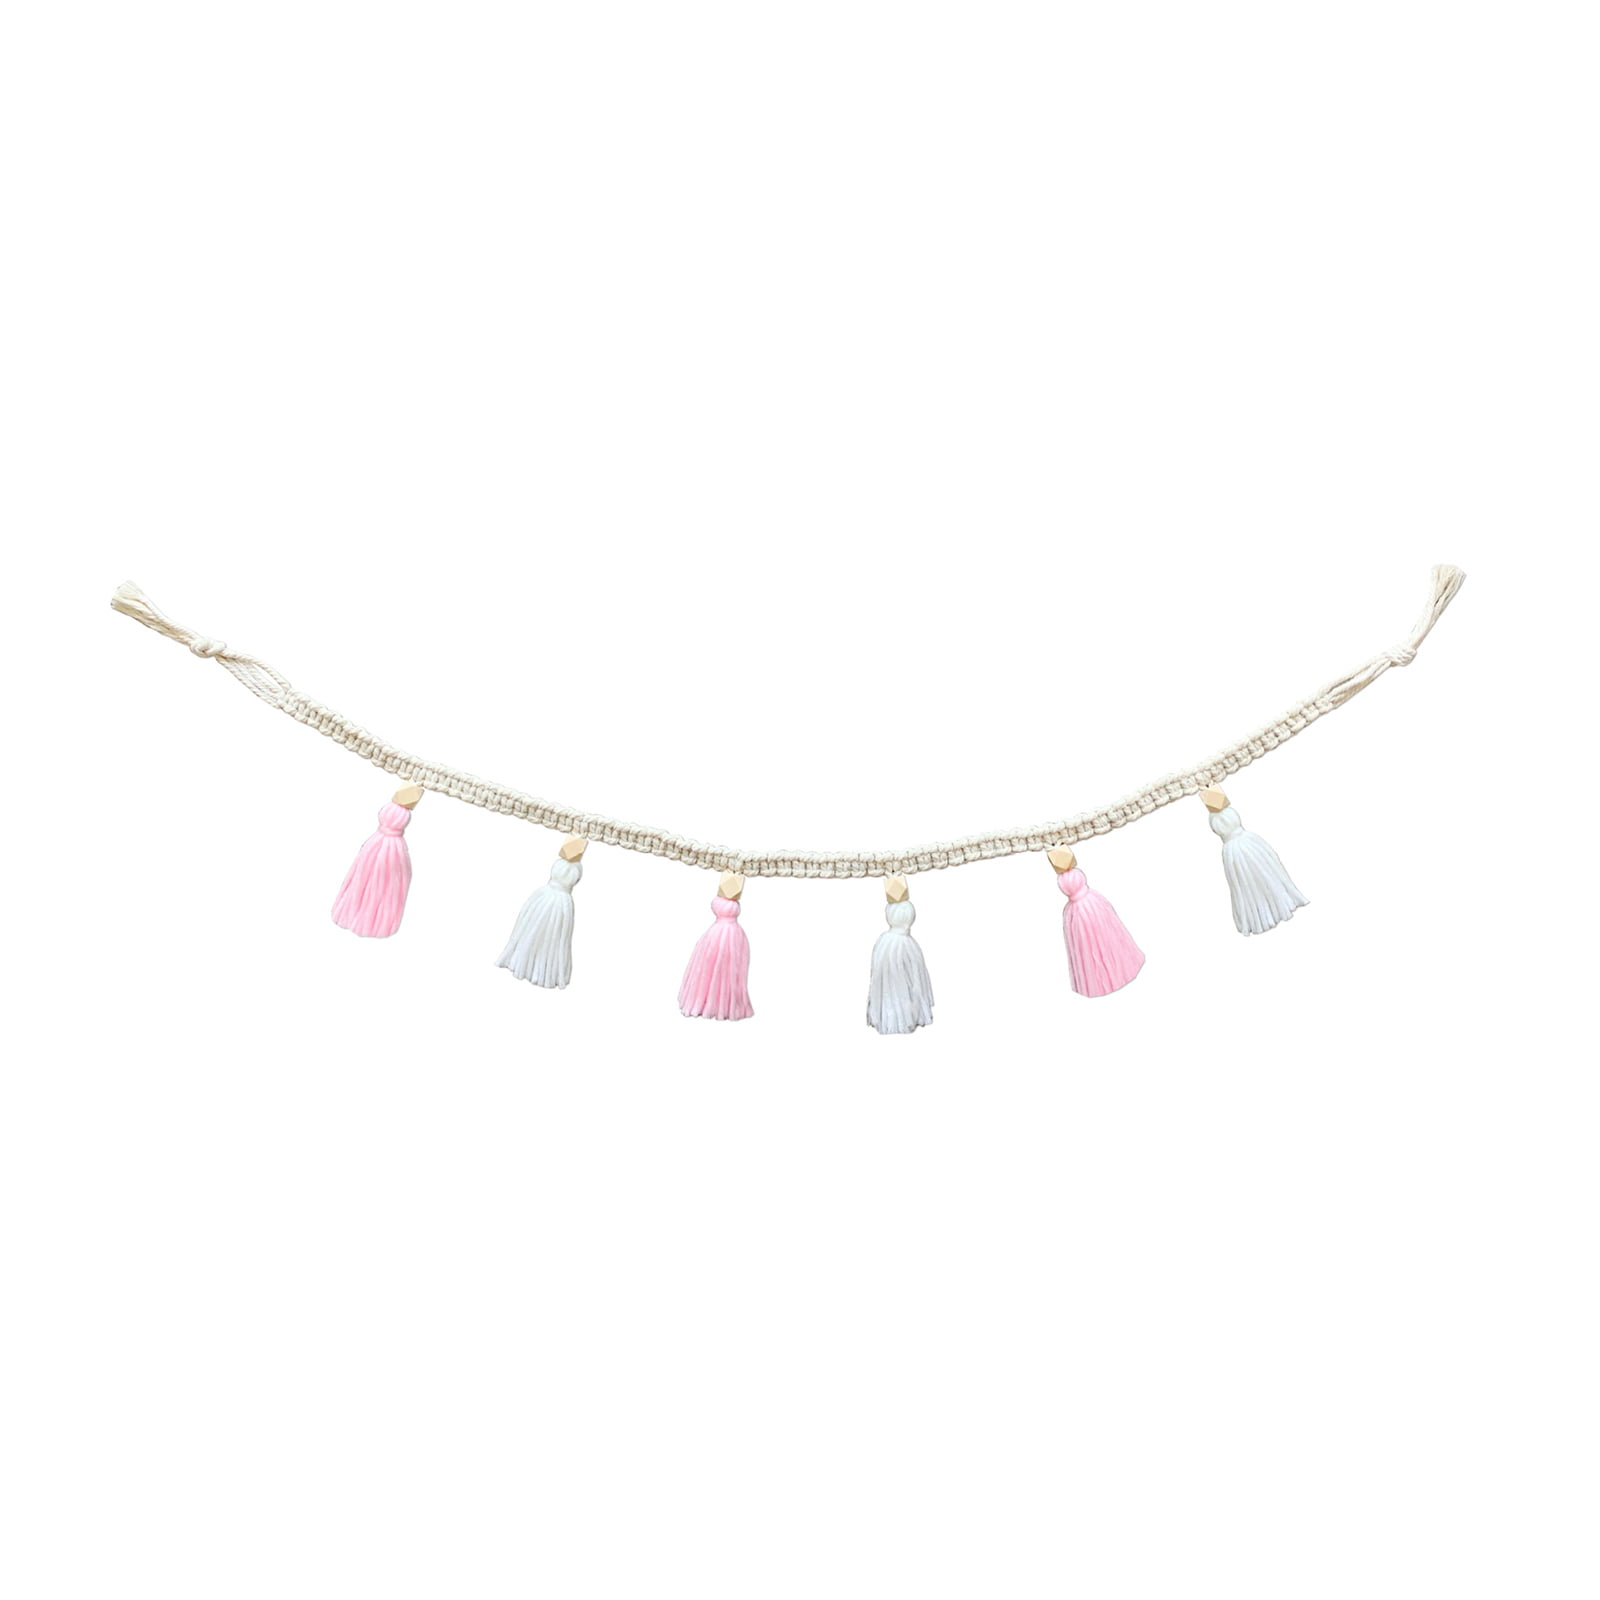 Nordic Cotton Rope Wood Bead Garland with Tassel Kids Baby Room Wall Decoration 